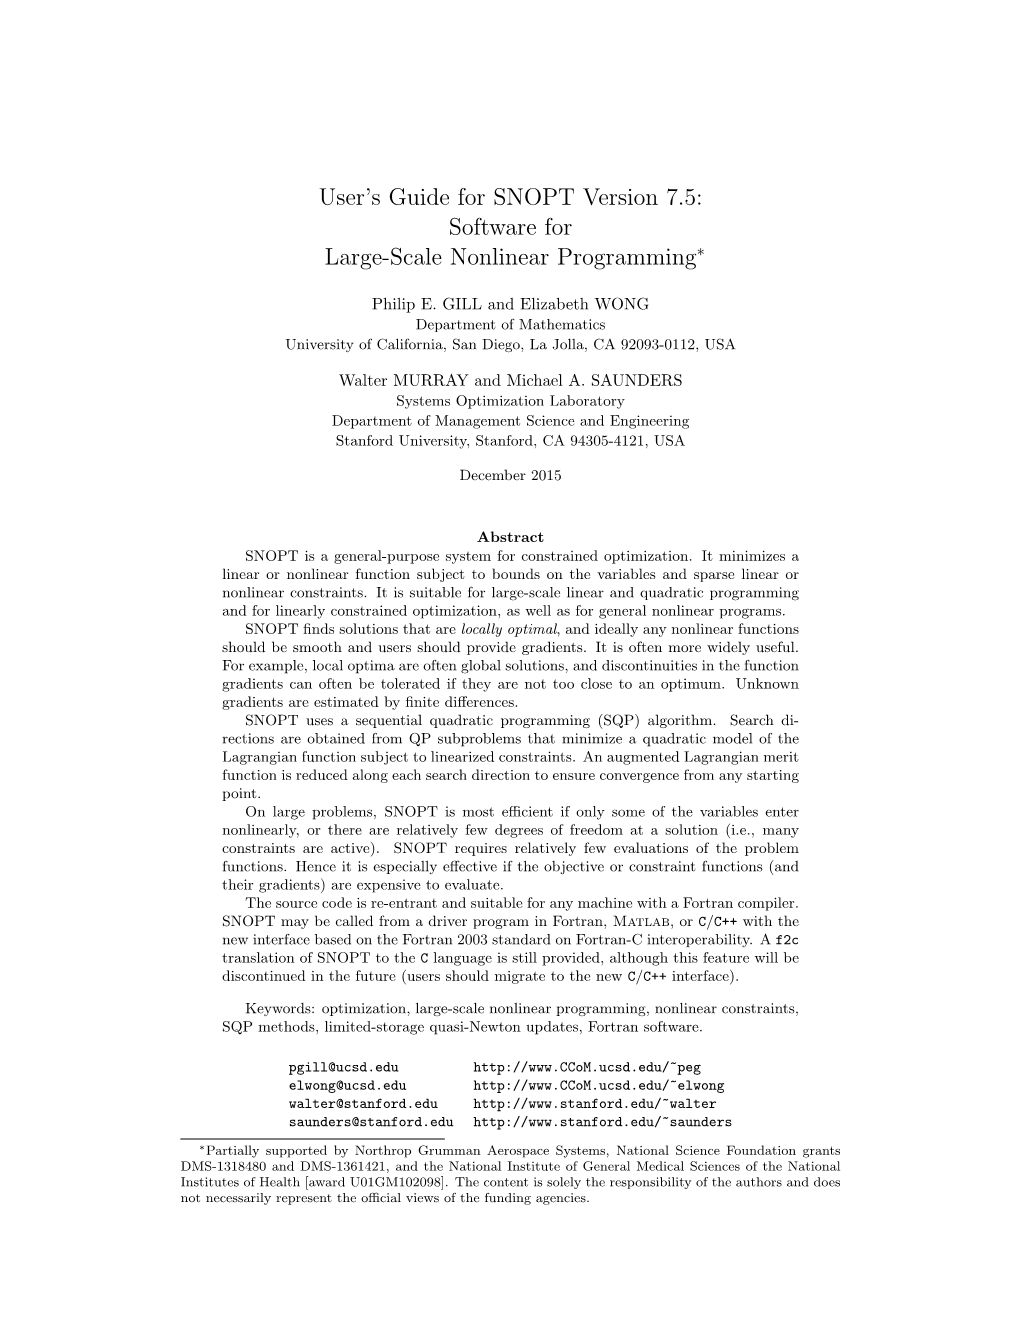 User's Guide for SNOPT Version 7.5: Software for Large-Scale Nonlinear